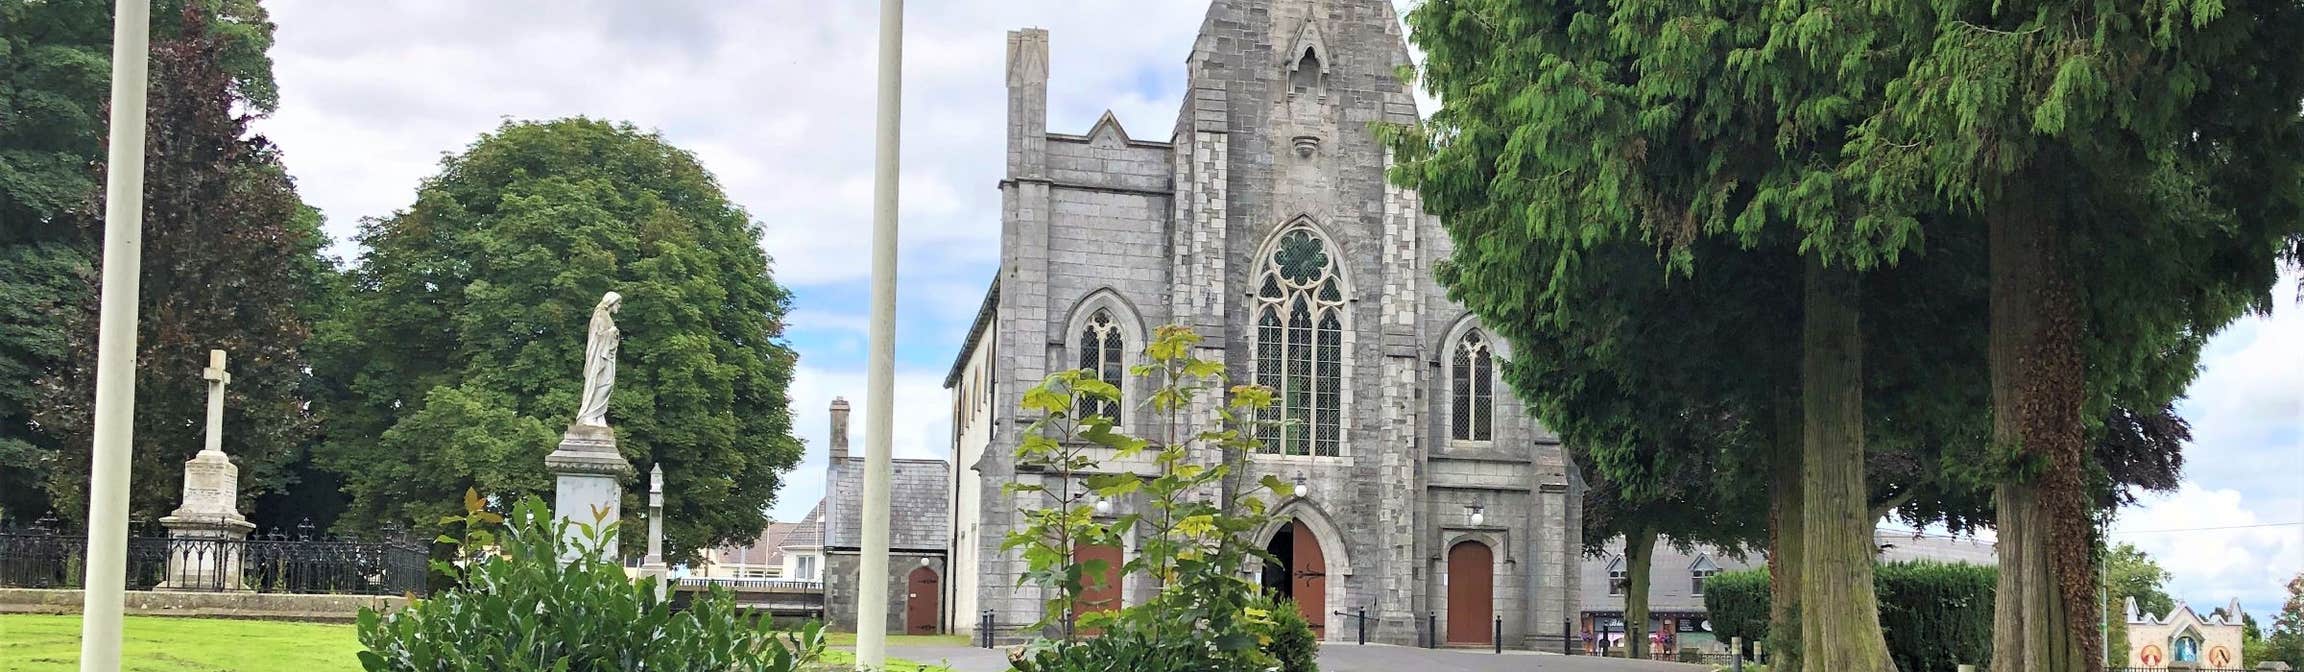 Image of a church in Ratoath in County Meath